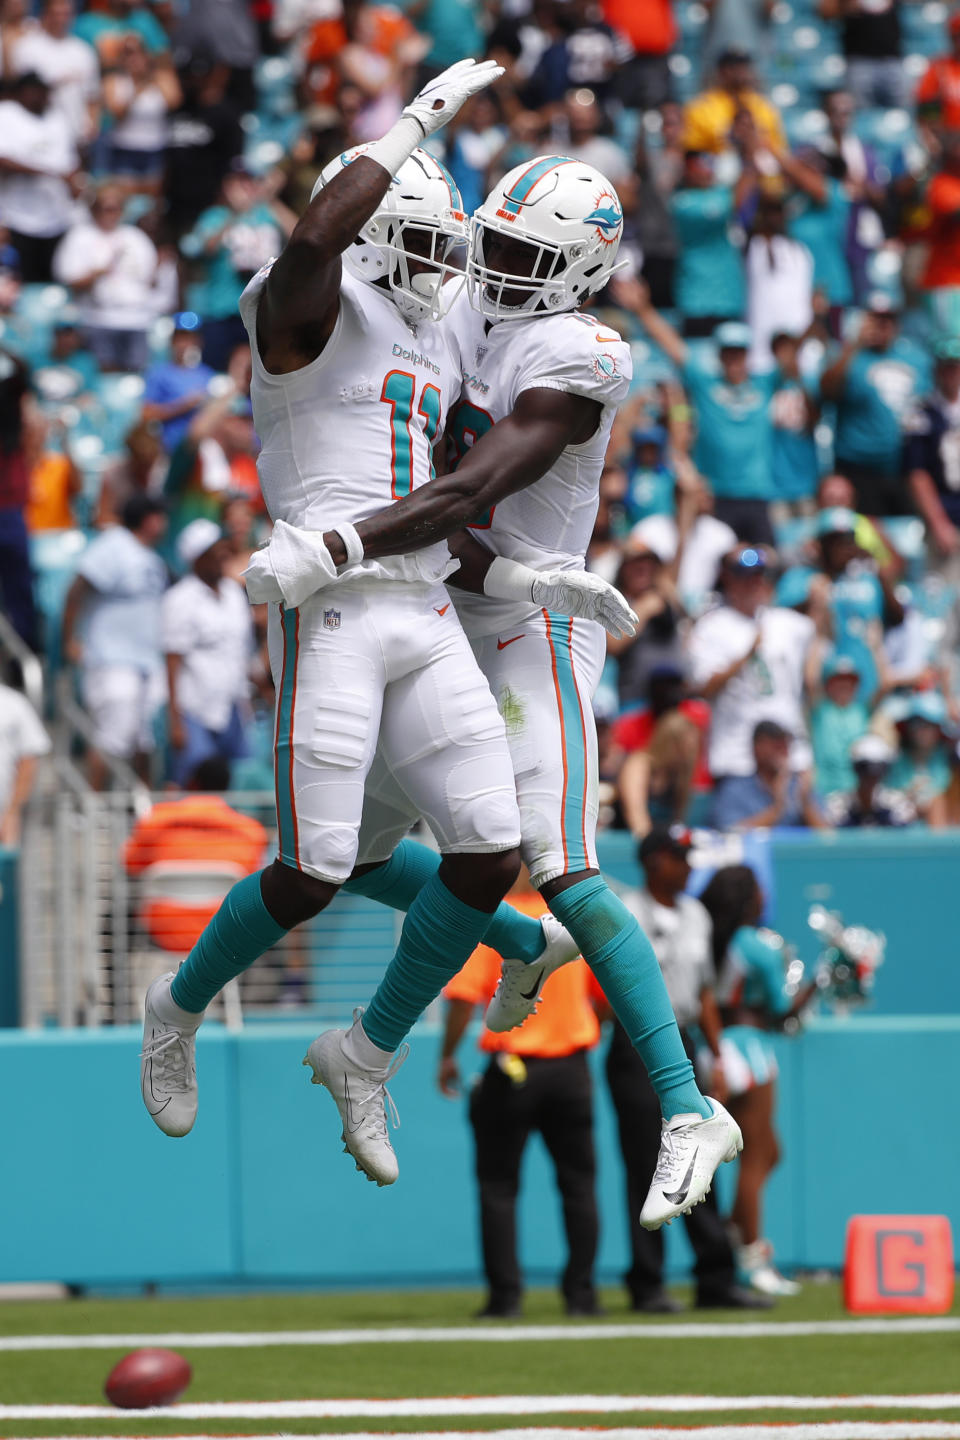 Miami Dolphins wide receiver Preston Williams (18) congratulates wide receiver DeVante Parker (11), after Parker scored a touchdown, during the first half at an NFL football game against the Los Angeles Chargers, Sunday, Sept. 29, 2019, in Miami Gardens, Fla. AP Photo/Wilfredo Lee)